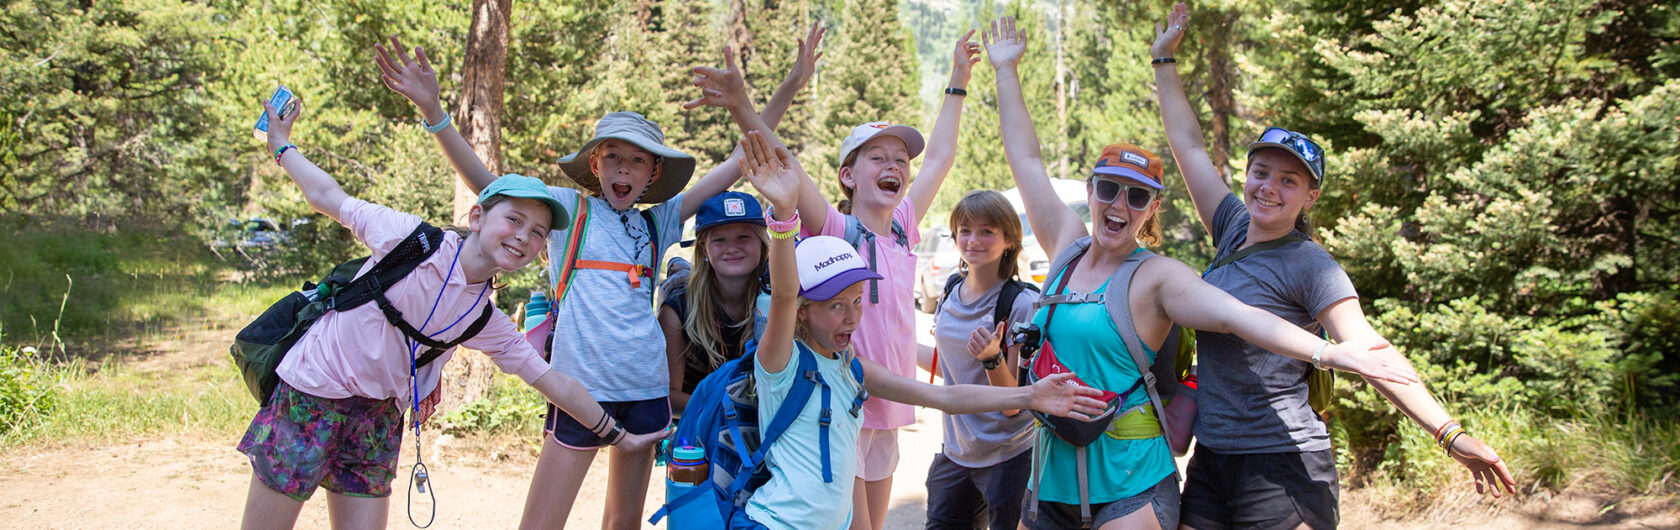 Group of girls with their hands in the air and big smiles on a hike.